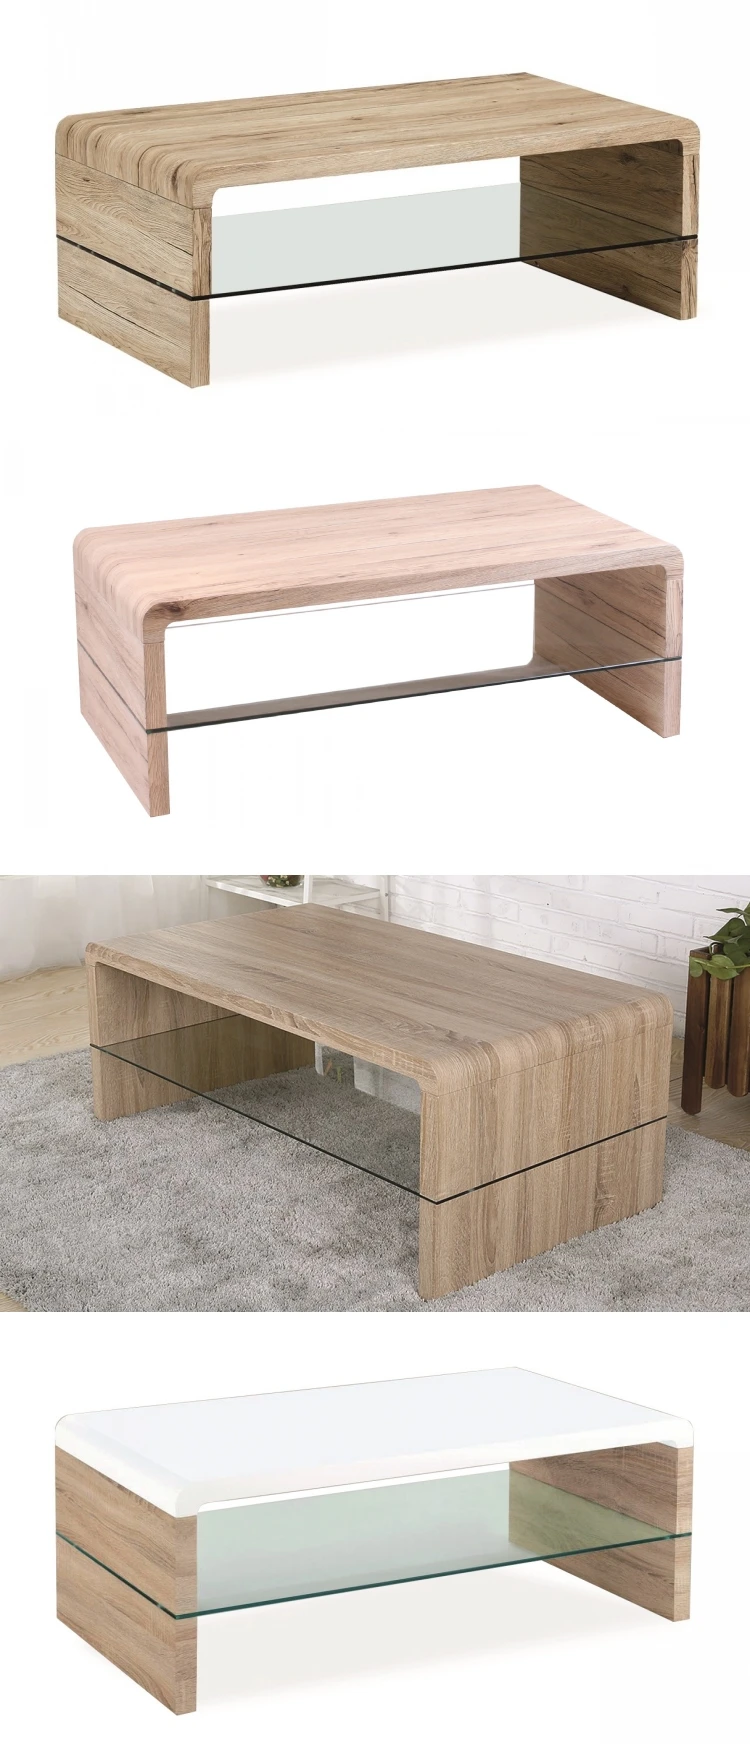 Chinese factory wholesale price high gloss painting MDF wooden coffee table tempered glass tea table